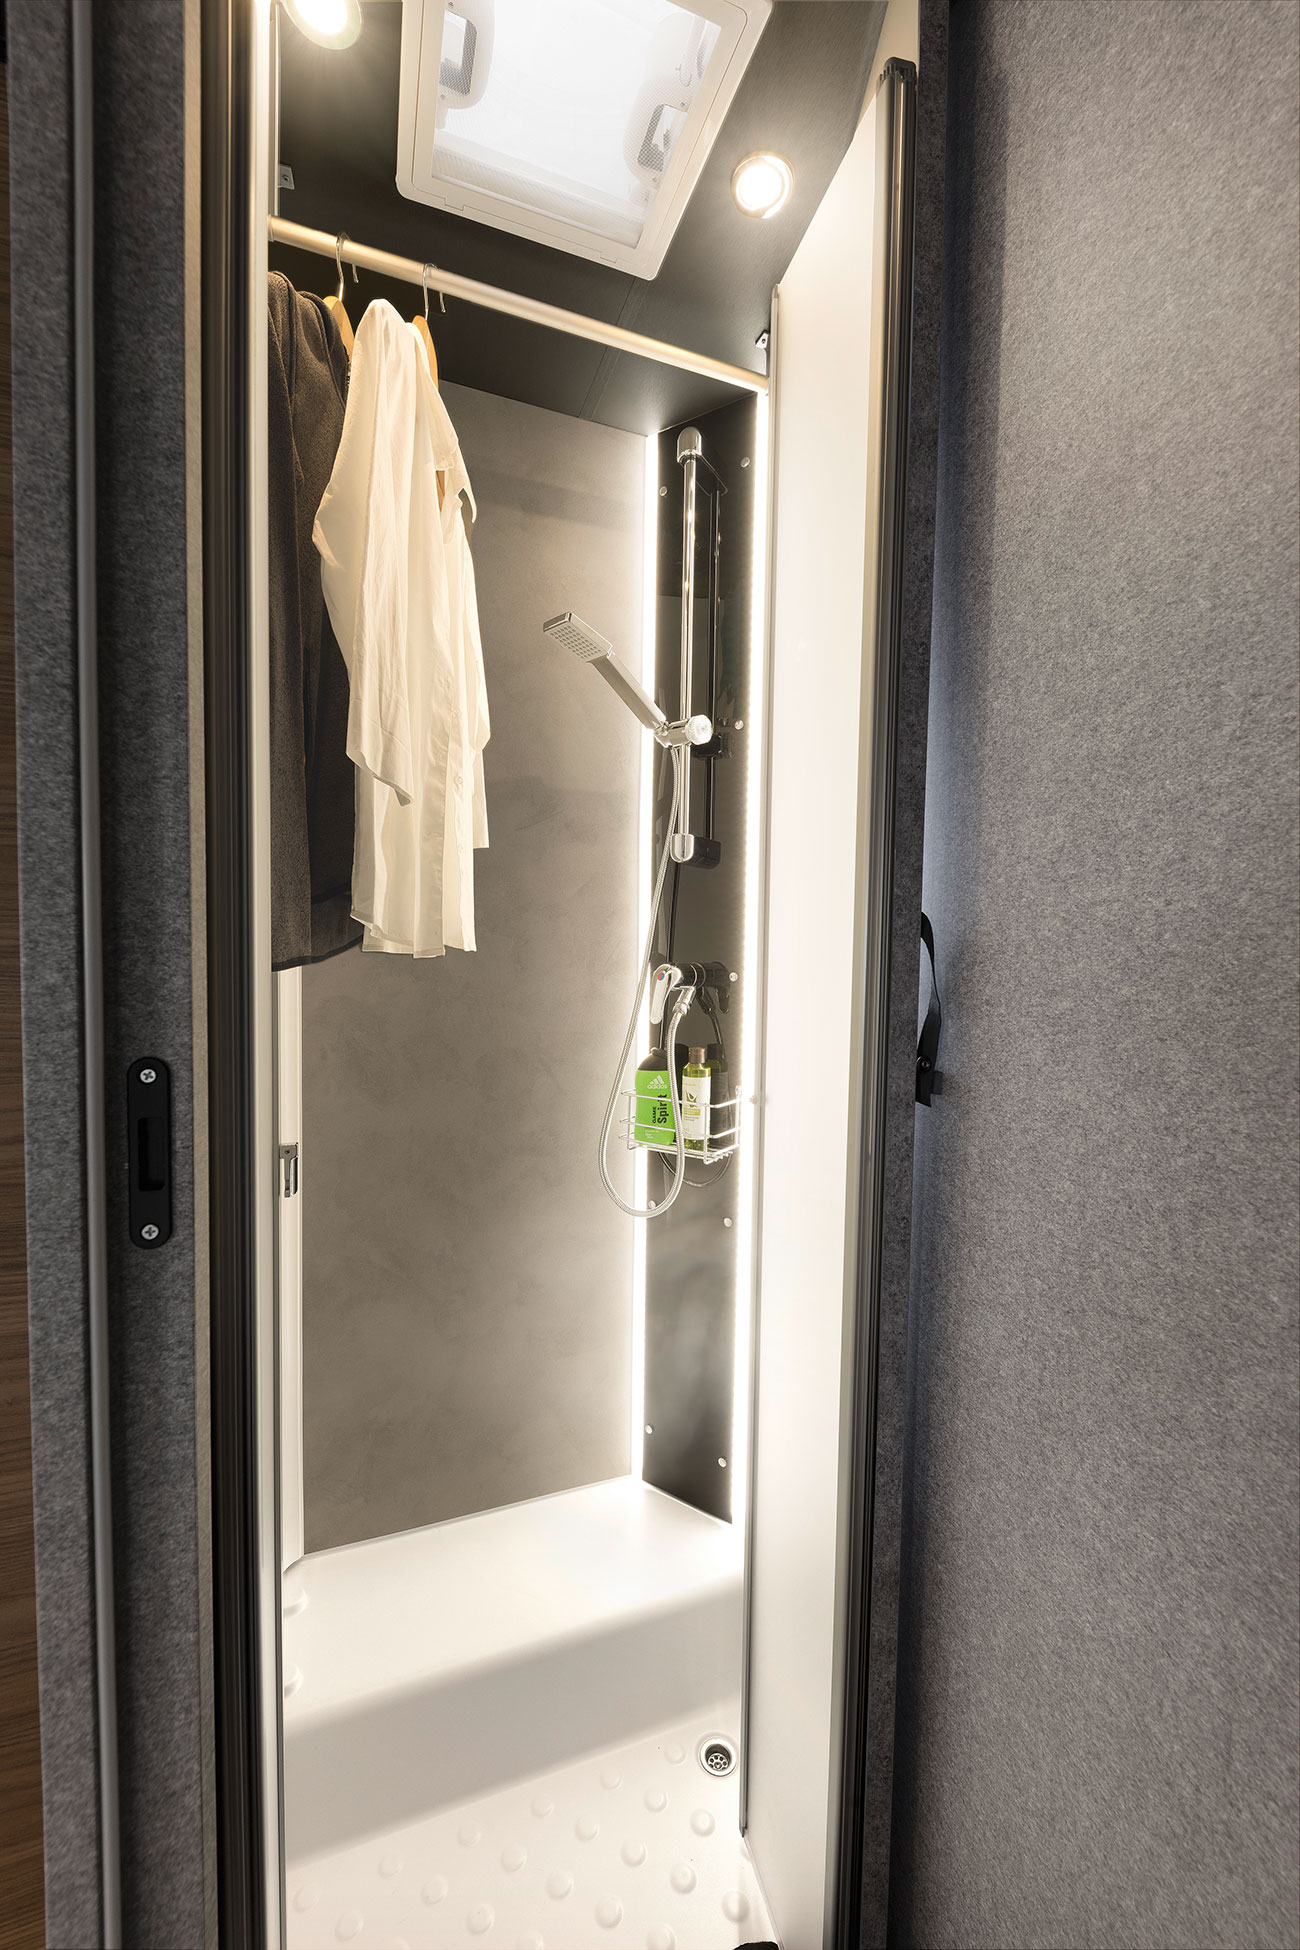 When not in use, the shower can be used as a drying room for wet clothes – or simply a wardrobe extension.